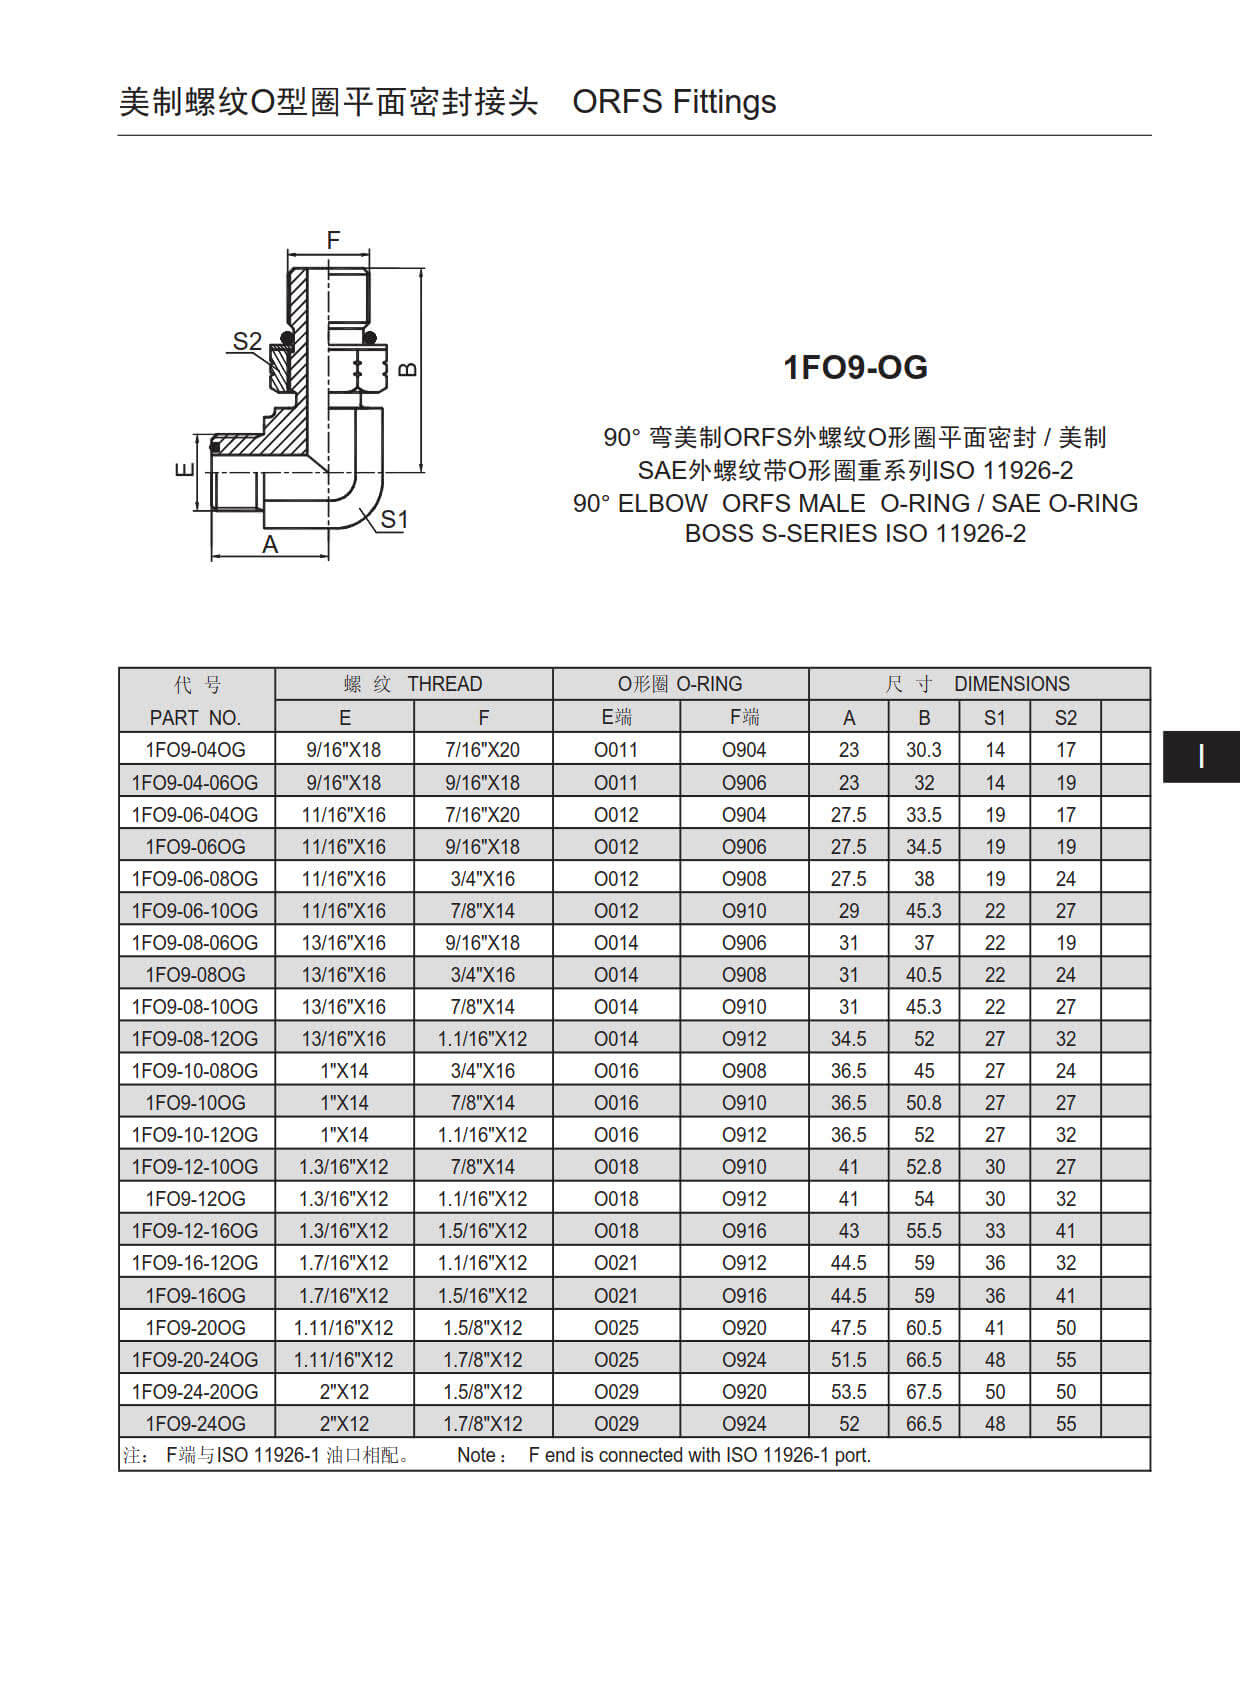 1FO9-0G 90°ELBOW ORFS MALE O-RING / SAE O-RING BOSS S-SERIES ISO 11926-2